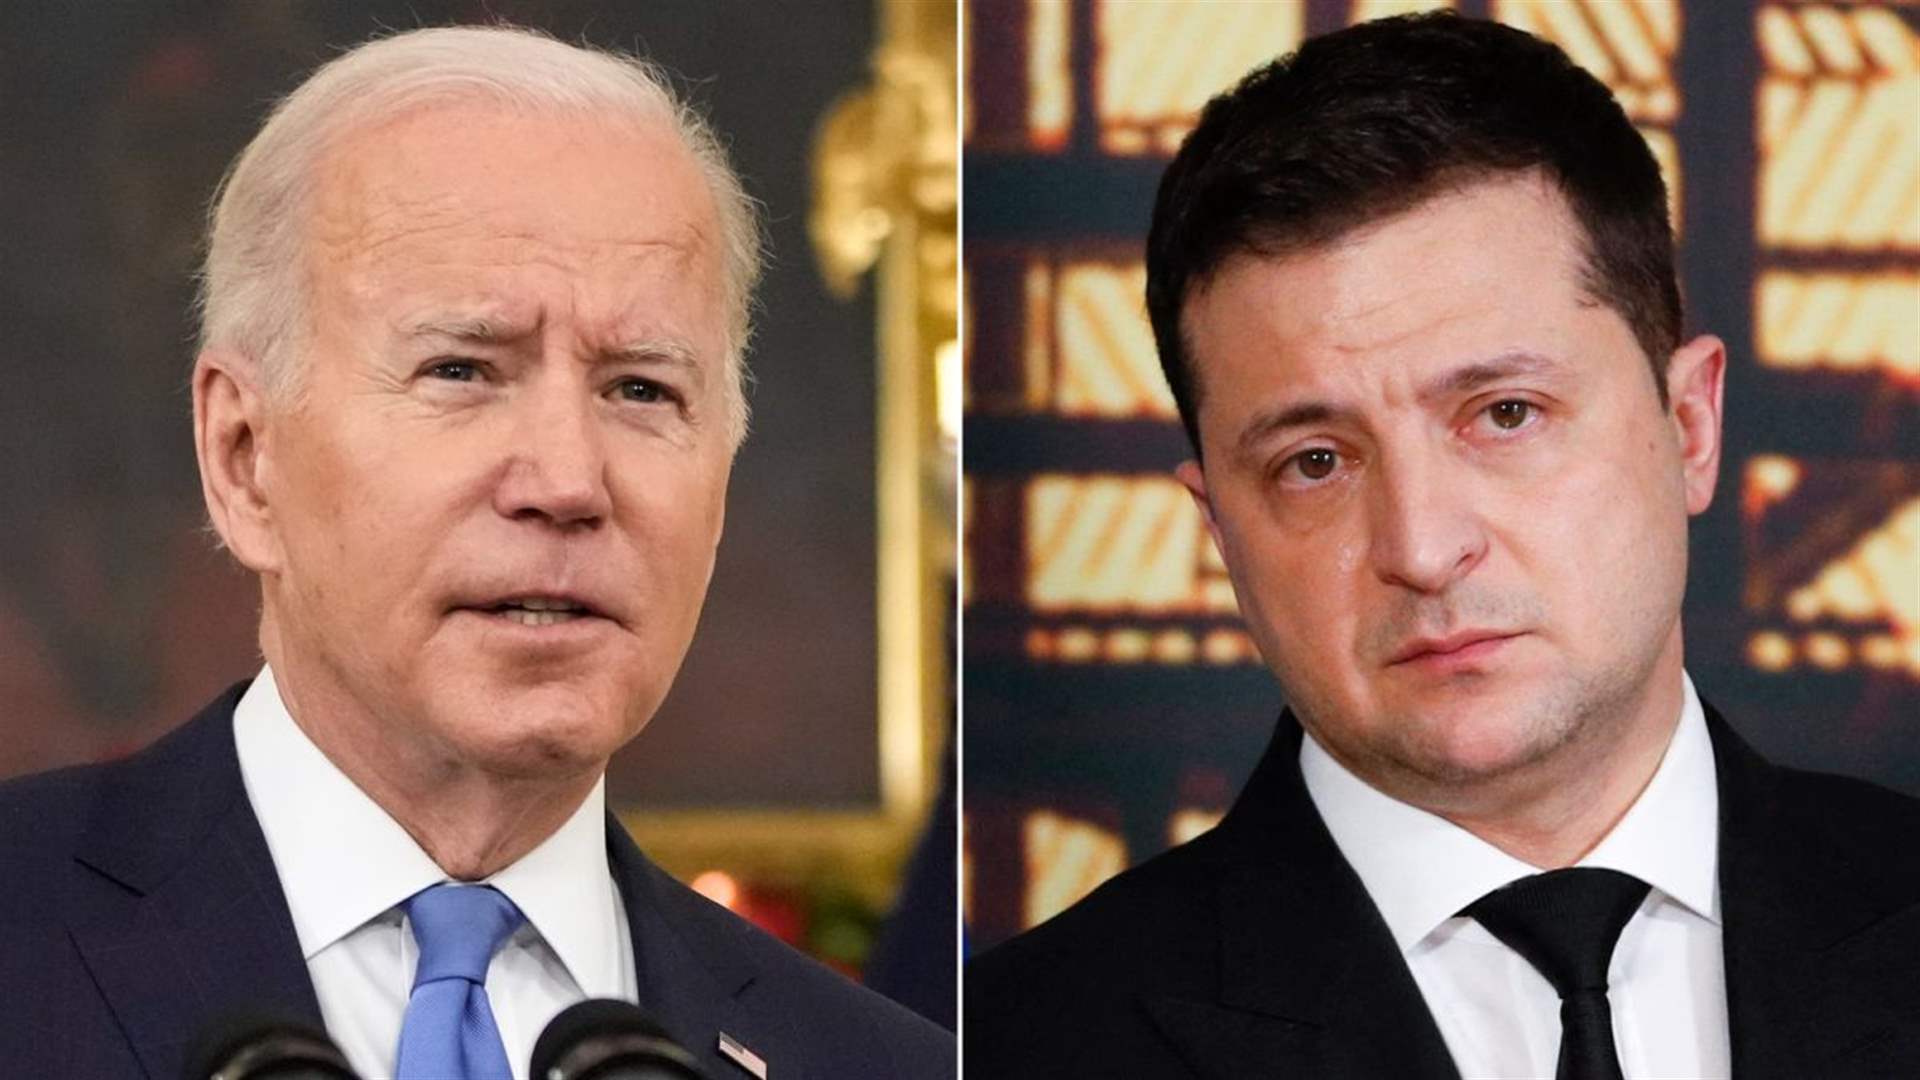 Biden promises Zelenskyy to &#39;quickly provide significant new security assistance packages&#39;